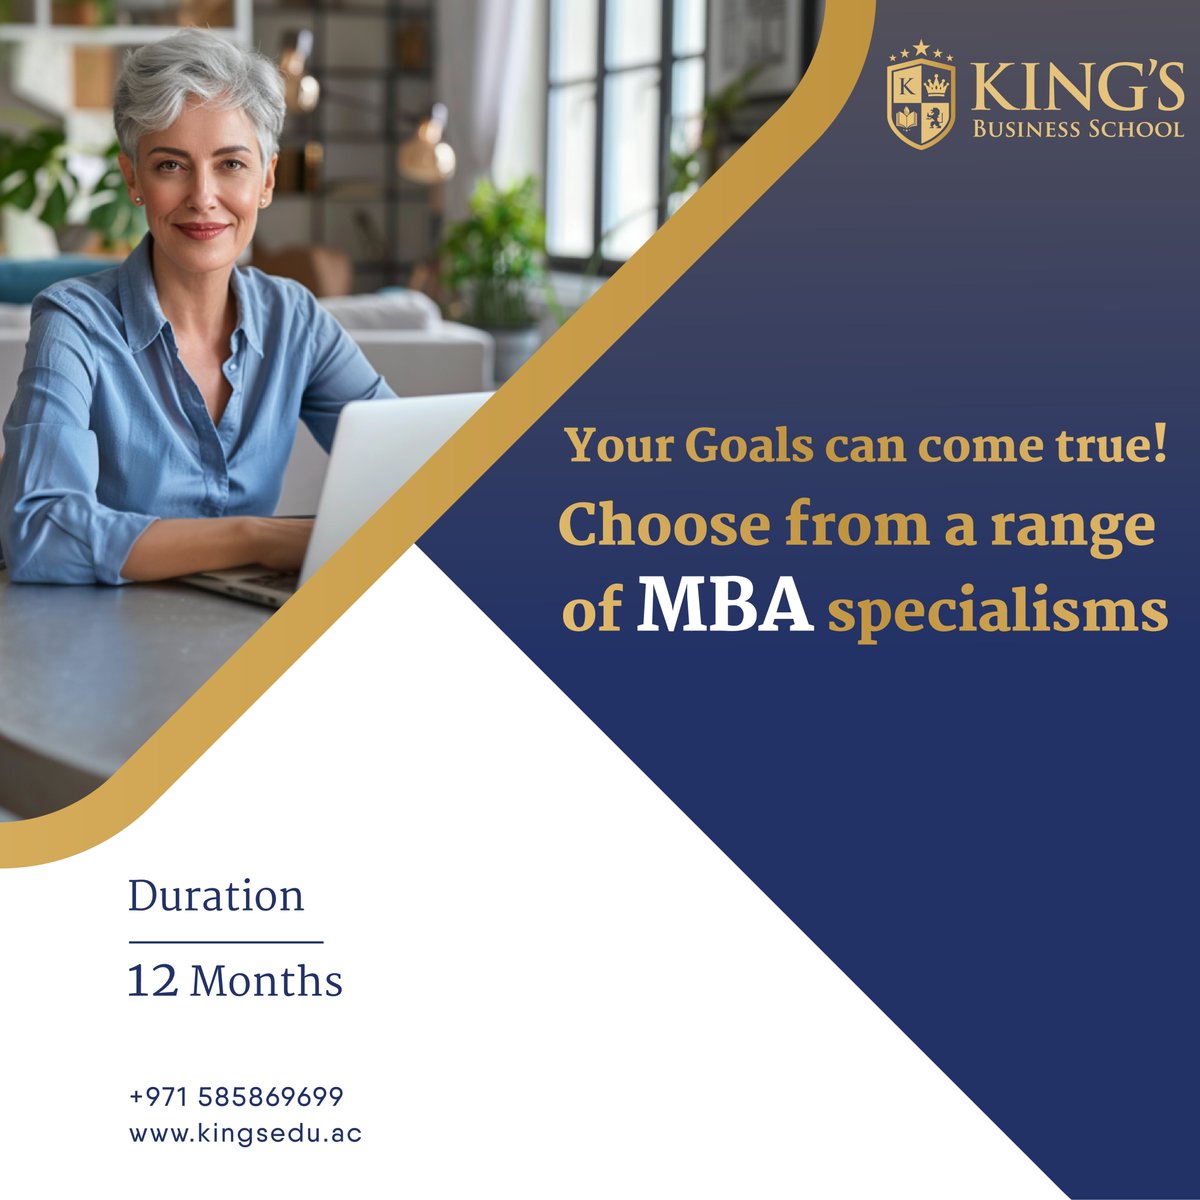 What is your true potential? Learn more with the range of specialized #MBA offered at King's Business School.  Our Specializations:

Contact us today: 00971585869699

#kingsbusinessschool #KingsBSchool #UnlockYourPotential